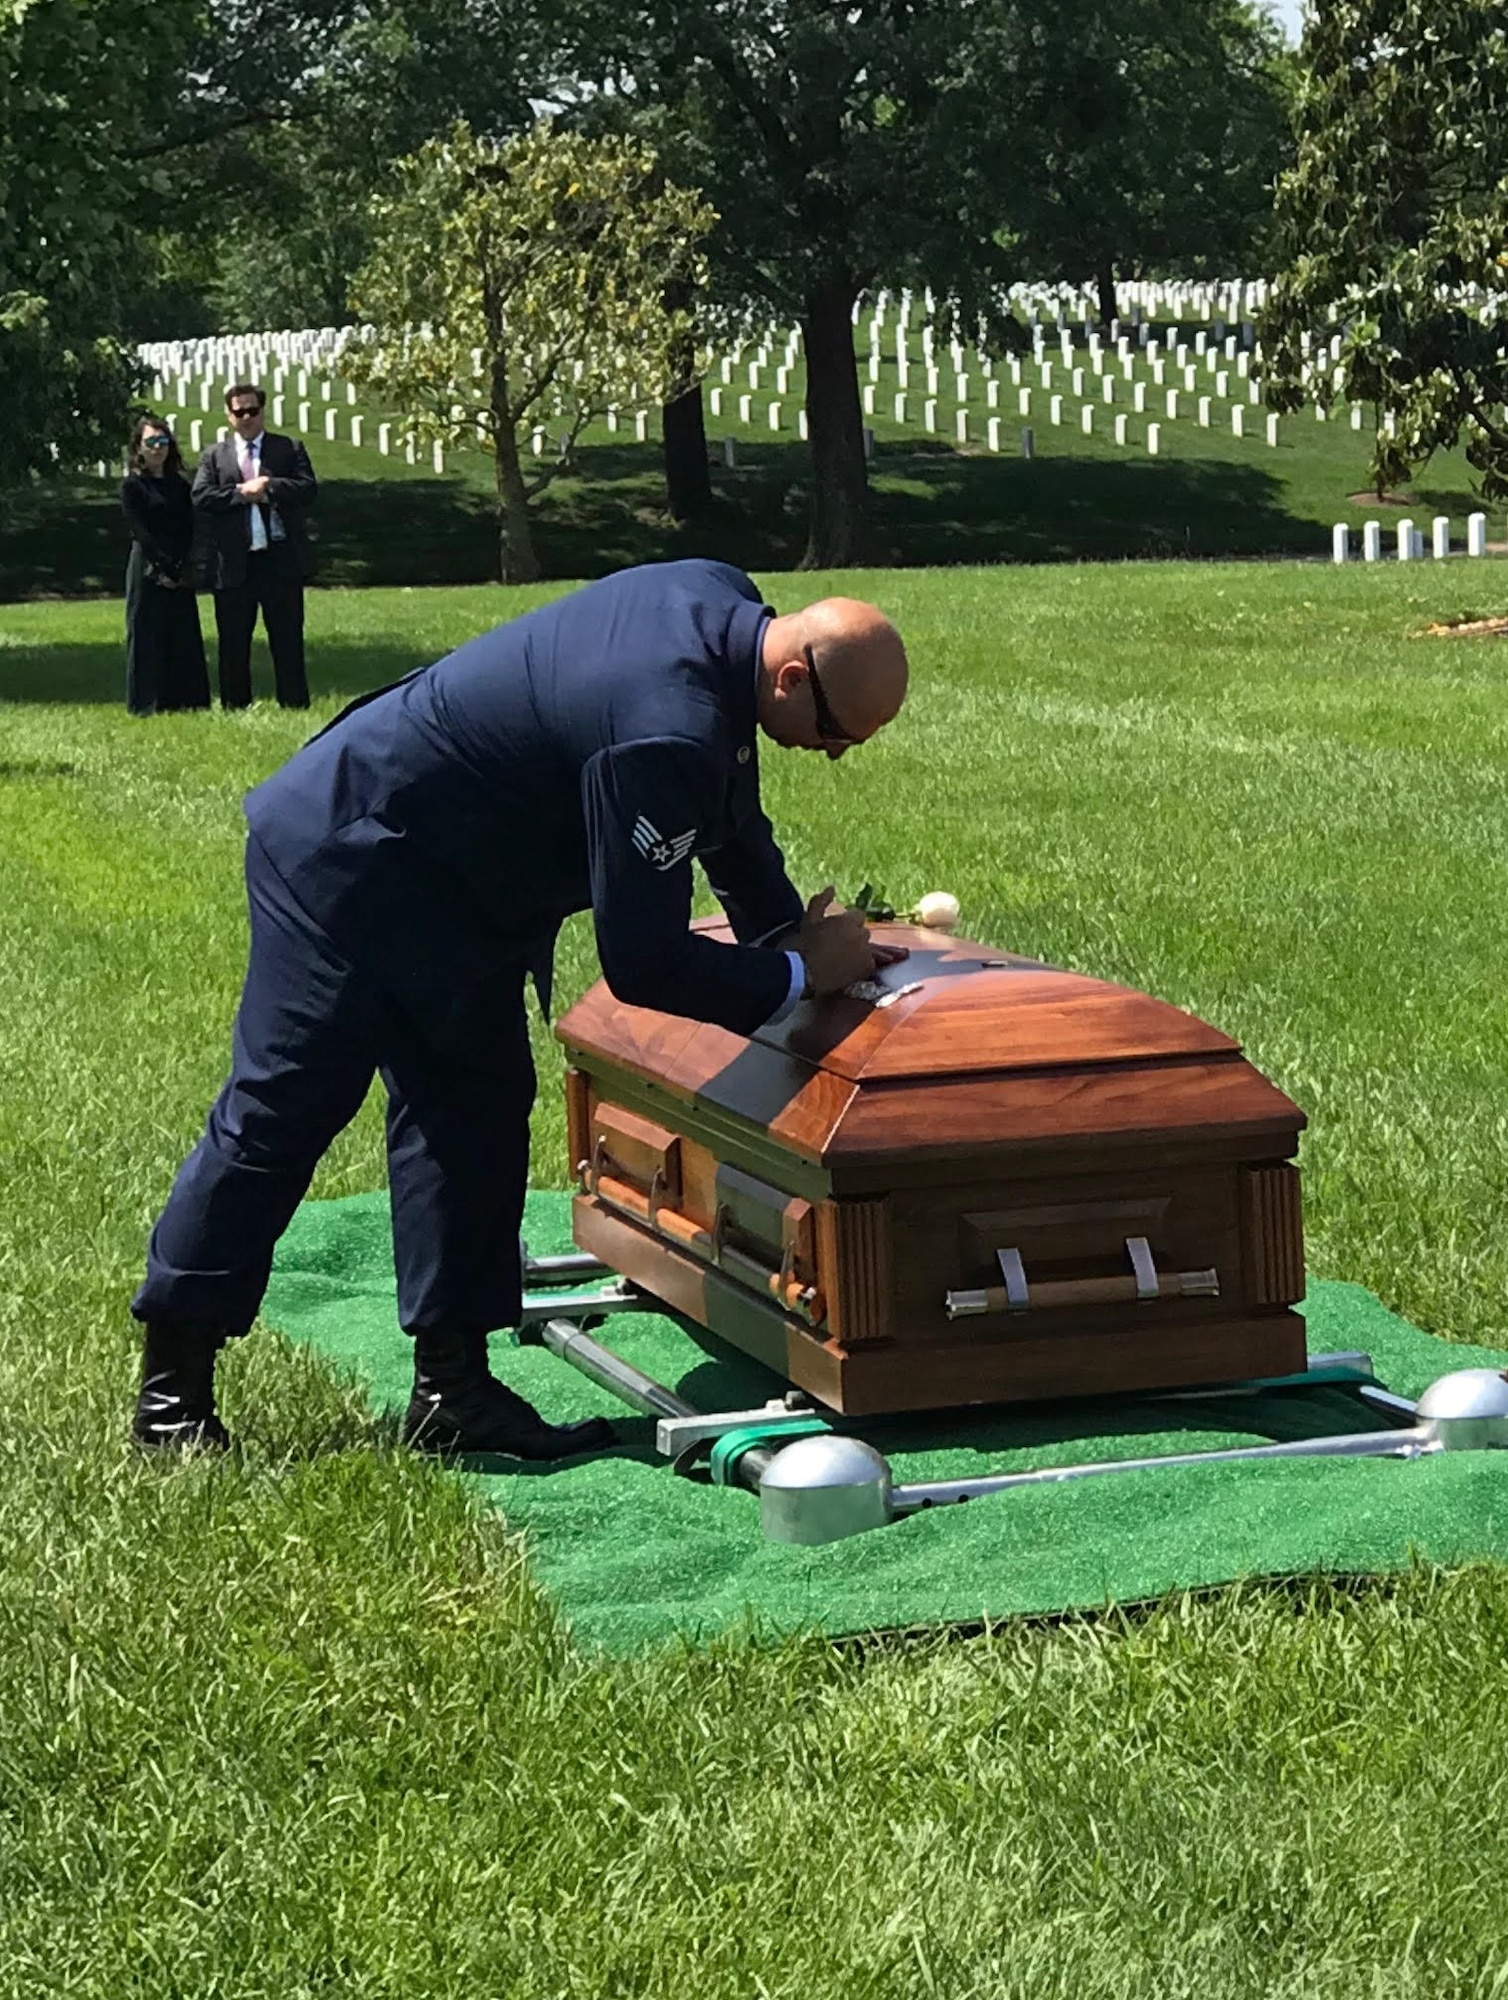 Staff Sgt. Brandon Forshaw, pararescueman, 308th Rescue Squadron, along with other colleagues, friends and loved ones, paid final respects to fallen pararescueman Staff Sgt. Carl Enis at Arlington National Cemetery May 21, 2018. In a time-honored tradition, members of the elite Guardian Angel triad of pararescue, press their pararescue flash taken from their maroon berets, into the lid of the casket to honor their fallen teammate. Enis was providing combat rescue support for Inherent Resolve, when he, along with six other Airmen, was killed in an HH-60G Pave Hawk helicopter crash in Anbar Province, Iraq, March 15, 2018. The Guardian Angel triad consists of pararescuemen, combat rescue officers and SERE or survival specialists who are expert swimmers, SCUBA divers, mountain climbers, parachutists, marksmen and trauma medics who are uniquely capable of performing rescues anywhere in the world. The 308th Rescue Squadron is part of the 920th Rescue Wing at Patrick Air Force Base, located in Cocoa Beach, Florida. (Courtesy photo)